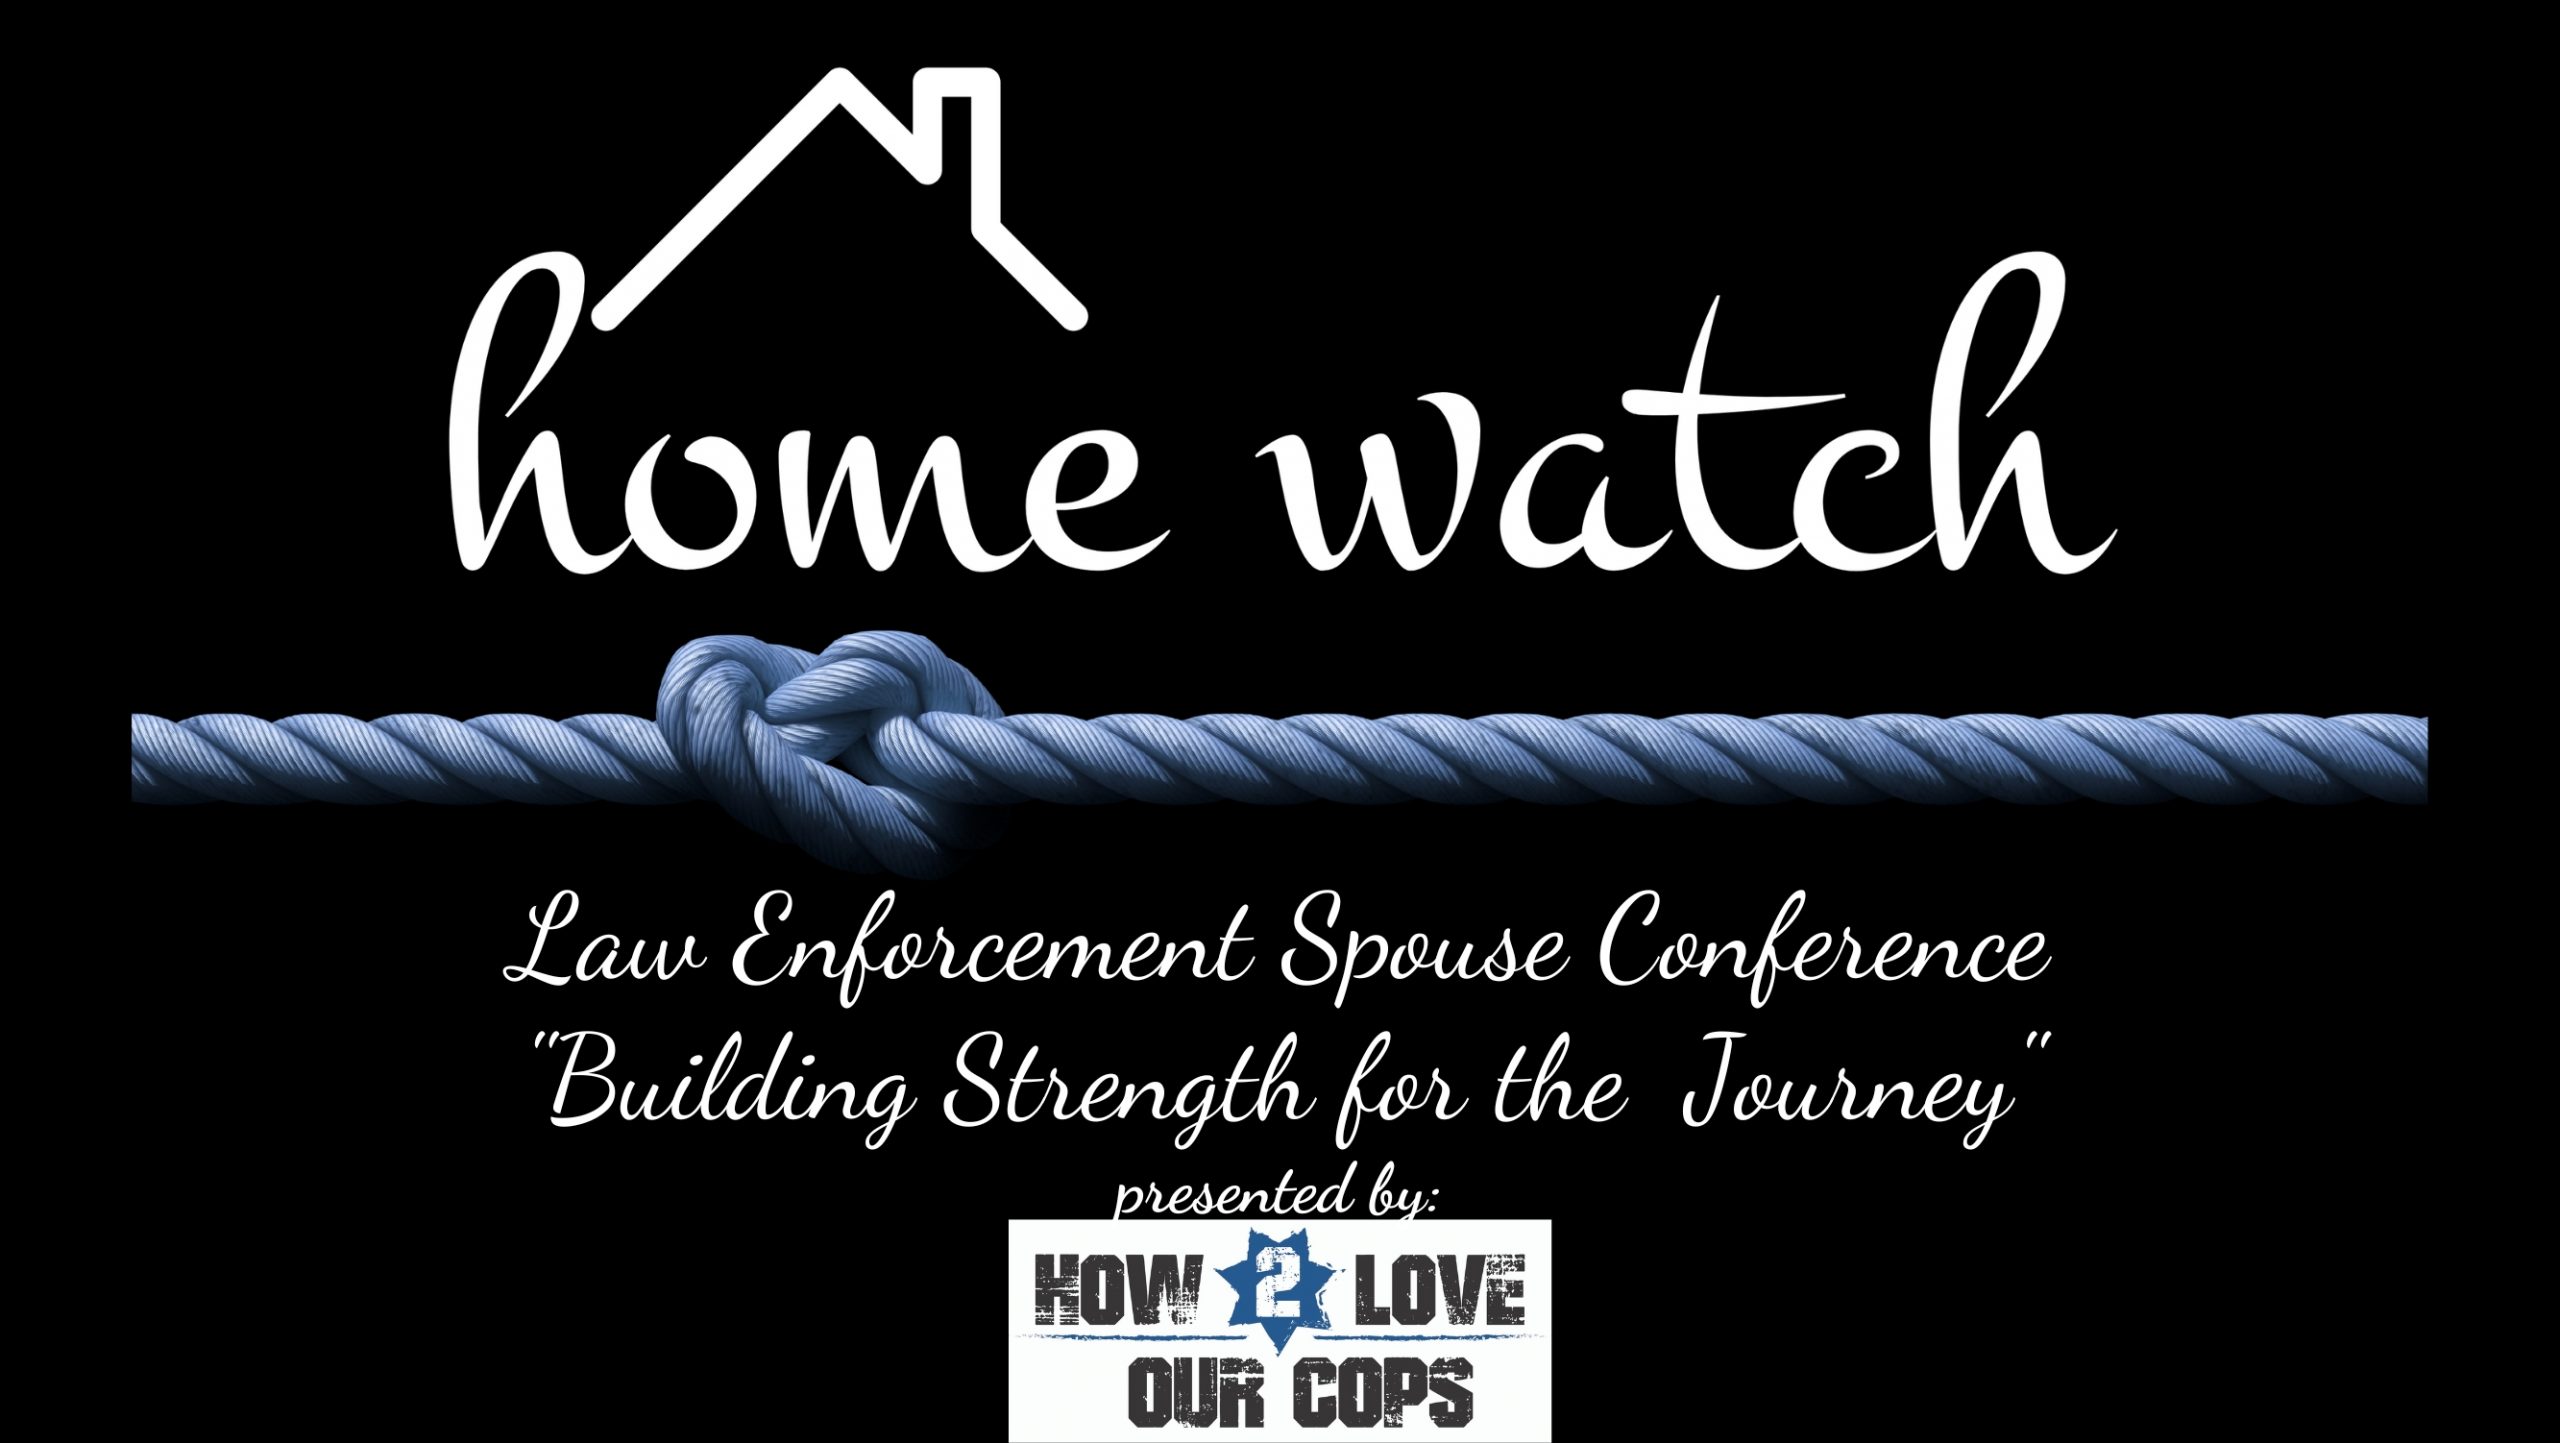 How-2-love-our-cops-HomeWatch-cover